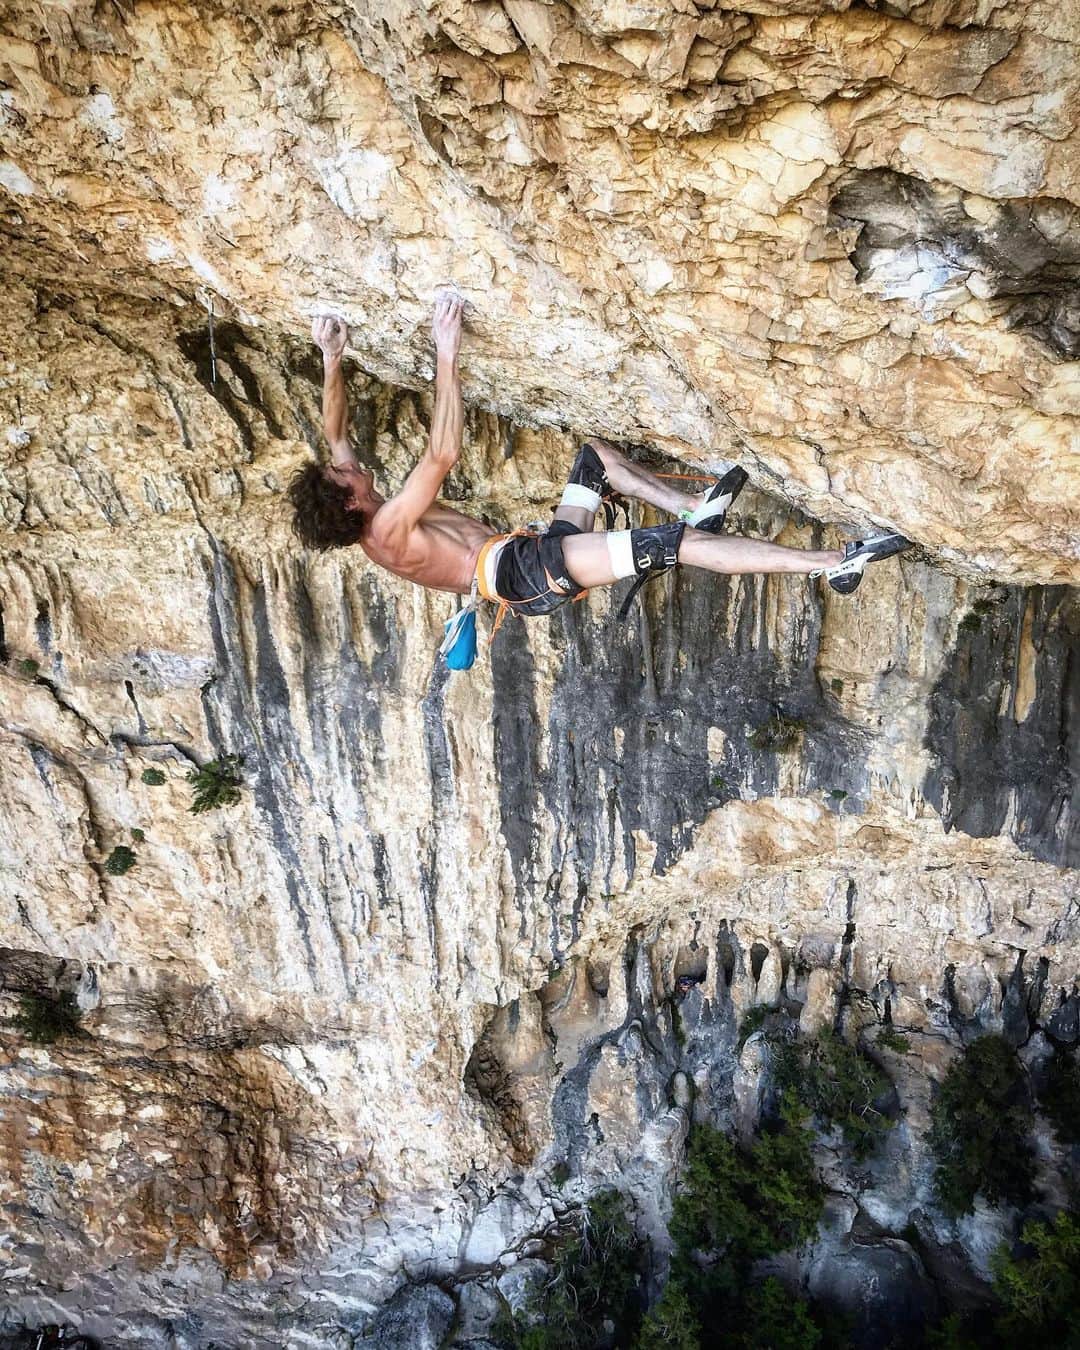 デイブ・グラハムさんのインスタグラム写真 - (デイブ・グラハムInstagram)「The first month in Rodellar was pretty wild 🤪 Adapting to the massive roofs and the burly yet technical style of resistance climbing took some learning, but adjusting to the average temperature of around 35 C was a total trip, WOW 🥵😂 !!! There were some minor hiccups, notably tweaking my MCL in a Kneebar (first time for everything 🙄) and then getting bitten by a large Golden Retriever separating a dog battle (holy shit that hurts 😣) After a chill week of healing my wounds I could find my groove again and sample some of the bigger and badder rigs of the area. Ali-Hulk Sit Extension Total [9B] is now on the list after sorting all the sections, Las Meninas [9A/+] in the Museo is an ultra sick resistance crimp line which feels attainable, as well this burly rig pictured here No Pain No Gain [9A+] 👀 Unfortunately we have no accommodation for the next couple weeks during the high season of tourism, so its time for some training, rest, and a few high octane three-day-on seshs via Cornu until we get our new Bungalow 🙄 And for anyone has been following the epic adventure this year, I have one HUGE update I’d love to share 🤗 I finally received my Spanish Residency 🥳🥳🥳 5 years legal in EU 😎!!!! Forward and Forever Onward 👐🏻 Now it’s time to finish some business here in Spain, siege the rigs as the temps drop over the next month, and get HYPE for SWITZERLAND, the next destination 🏡🌄🌌💫💎⛏🔥🤠!!!! 📸 from my homie @esteban.ele.eme 🙌🏻 @adidasterrex @fiveten_official @petzl_official @climb_up_officiel @frictionlabs @sendclimbing @tensionclimbing @alizee_dufraisse 😘」8月3日 21時26分 - dave_graham_